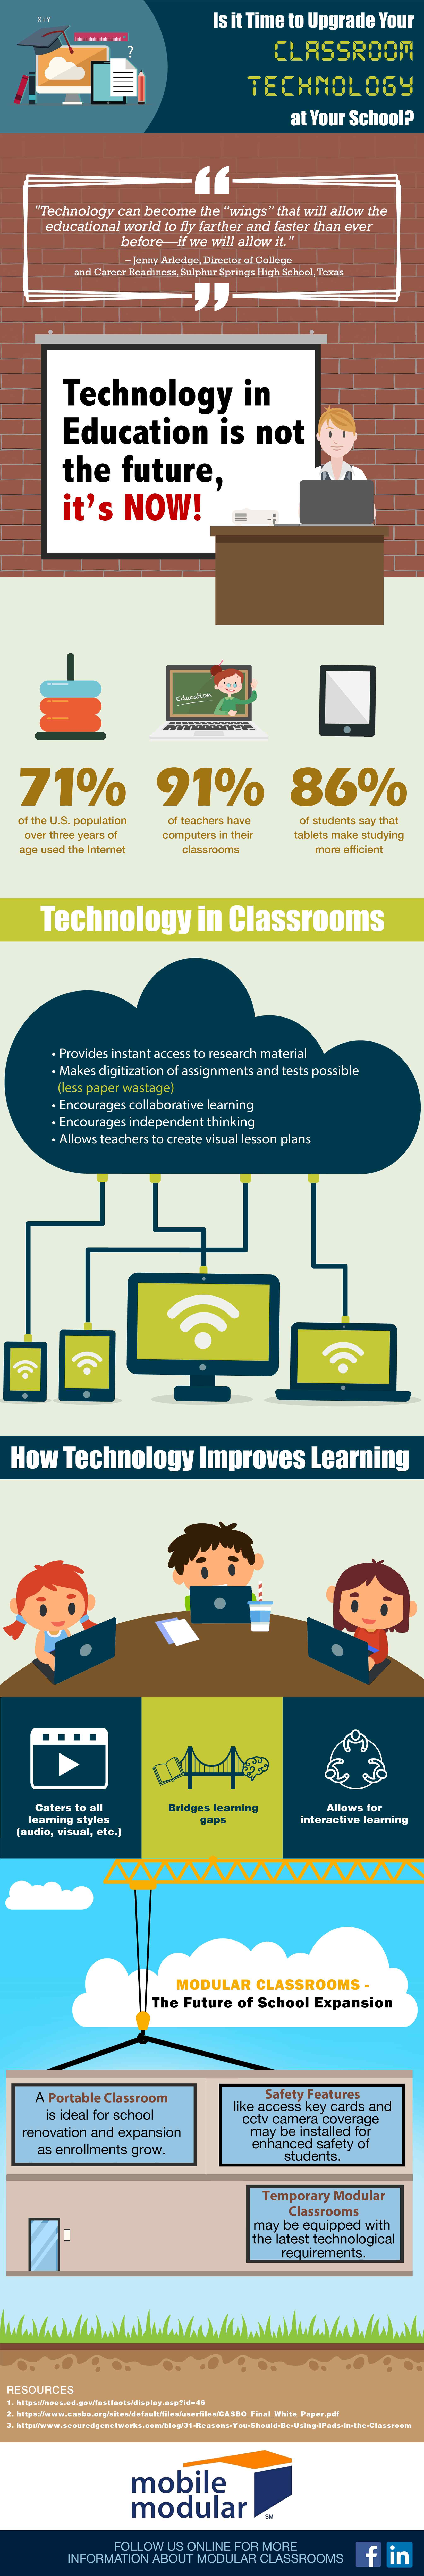 upgrade classroom technology infographic